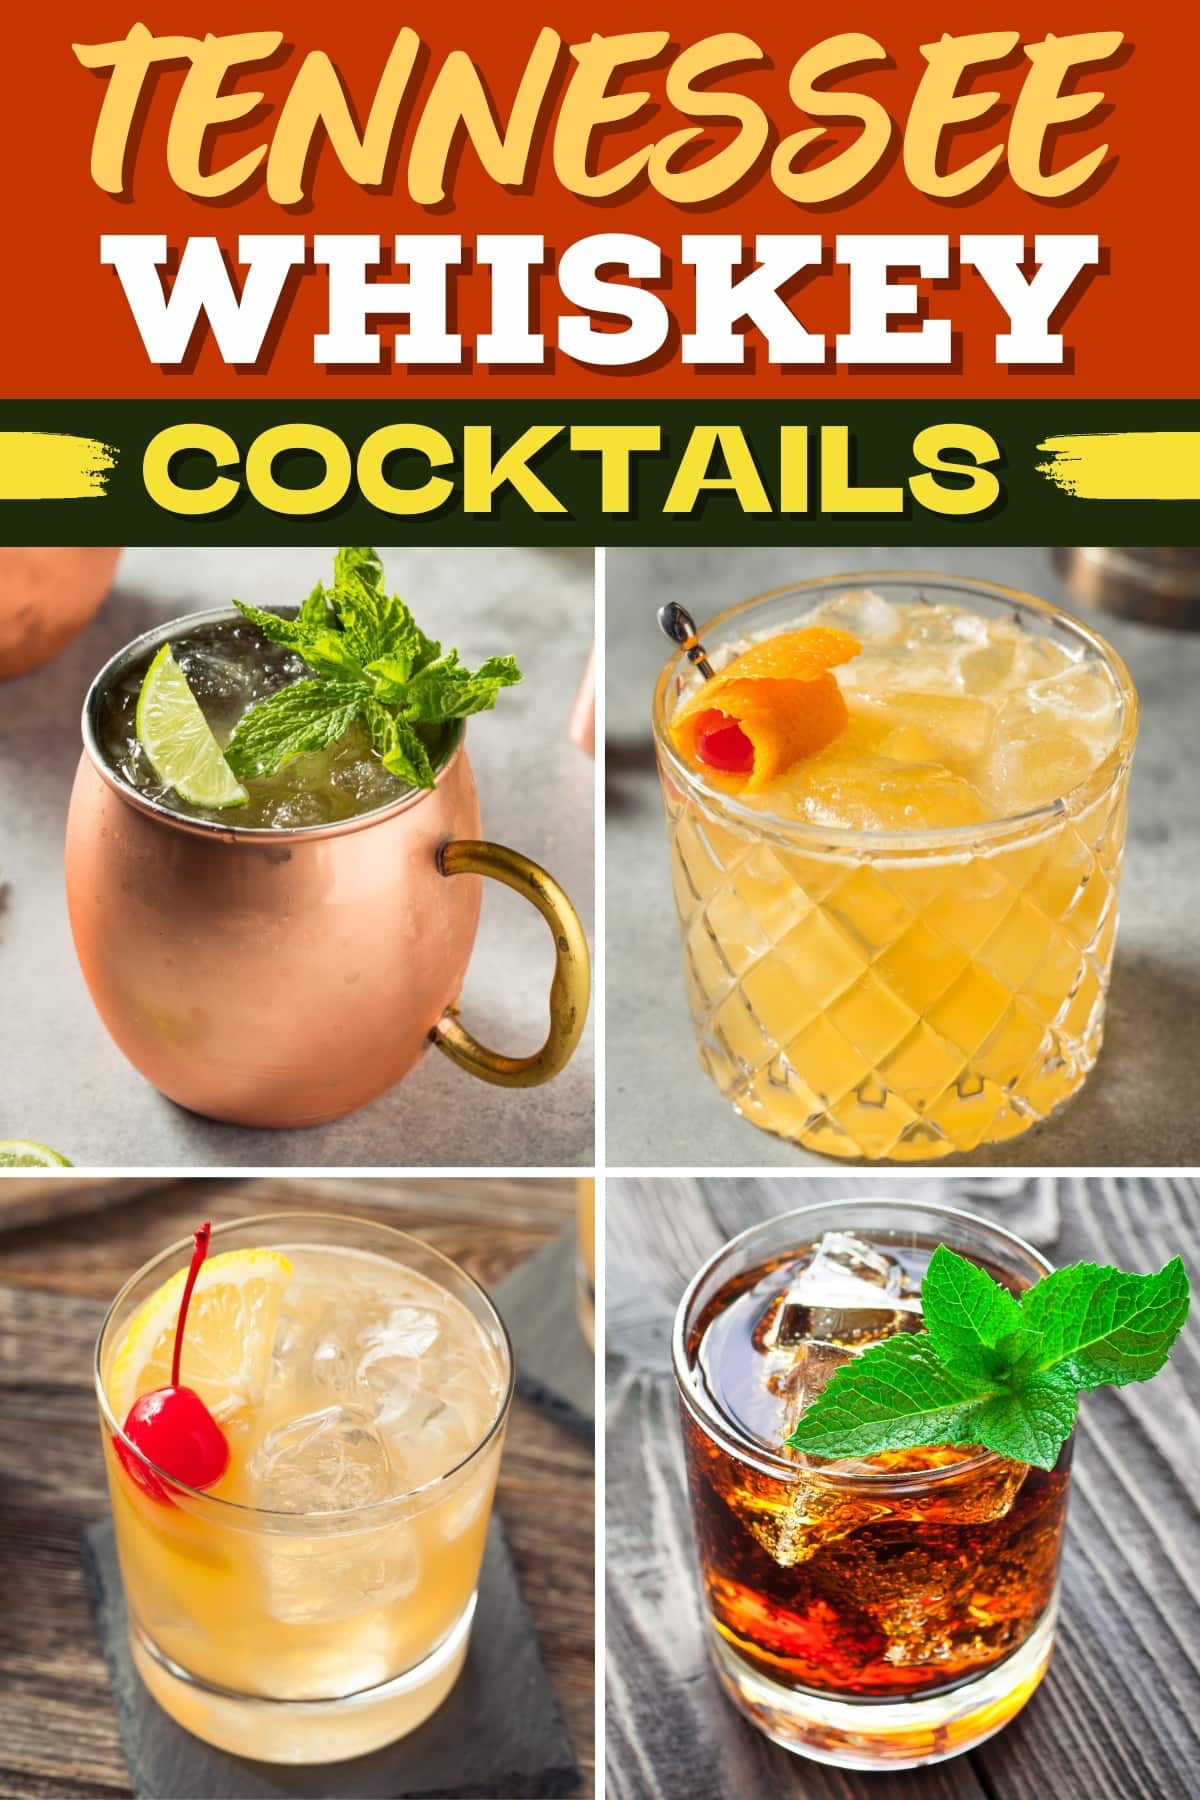 Tennessee Whiskey Cocktails